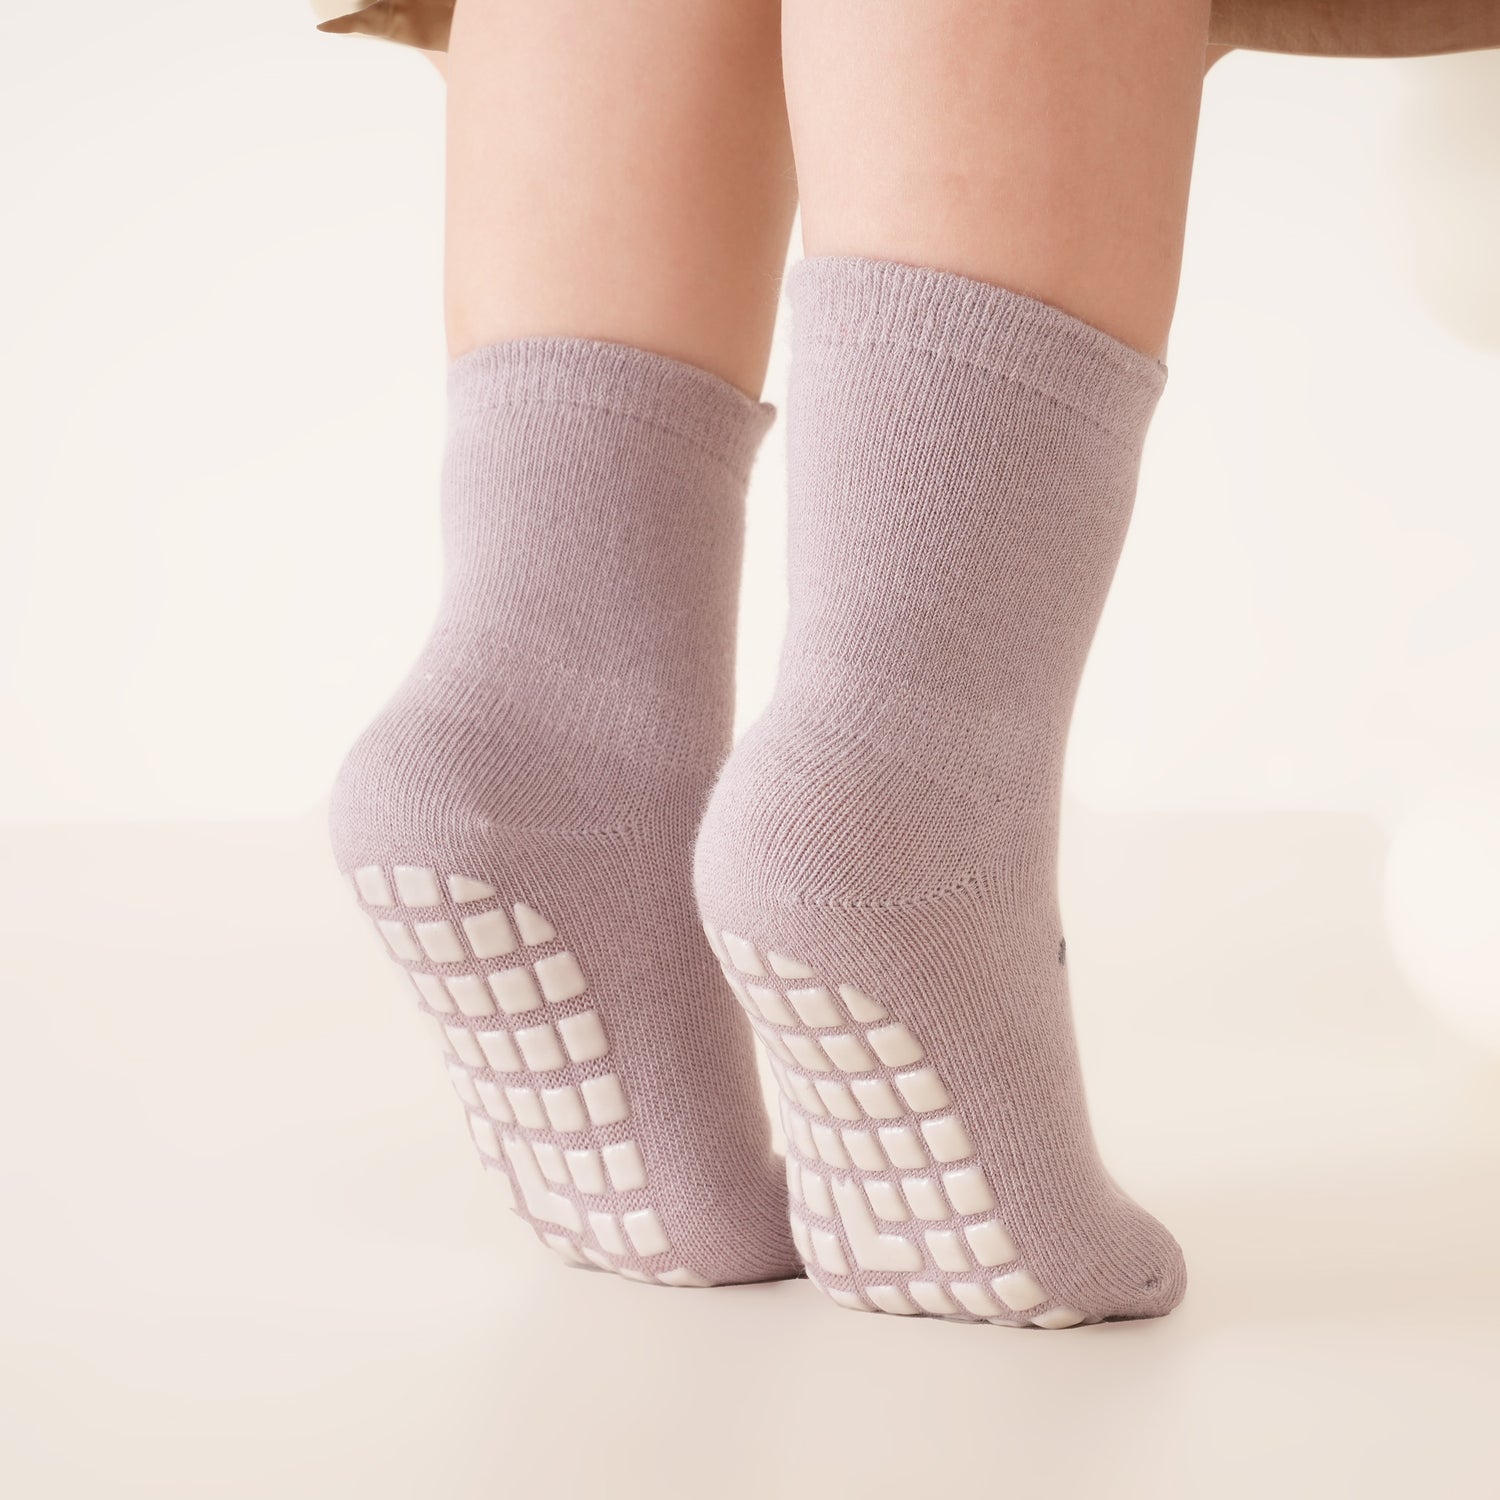 Into The Wild: Shoe-Socks with Non-Slip Grip for Toddlers